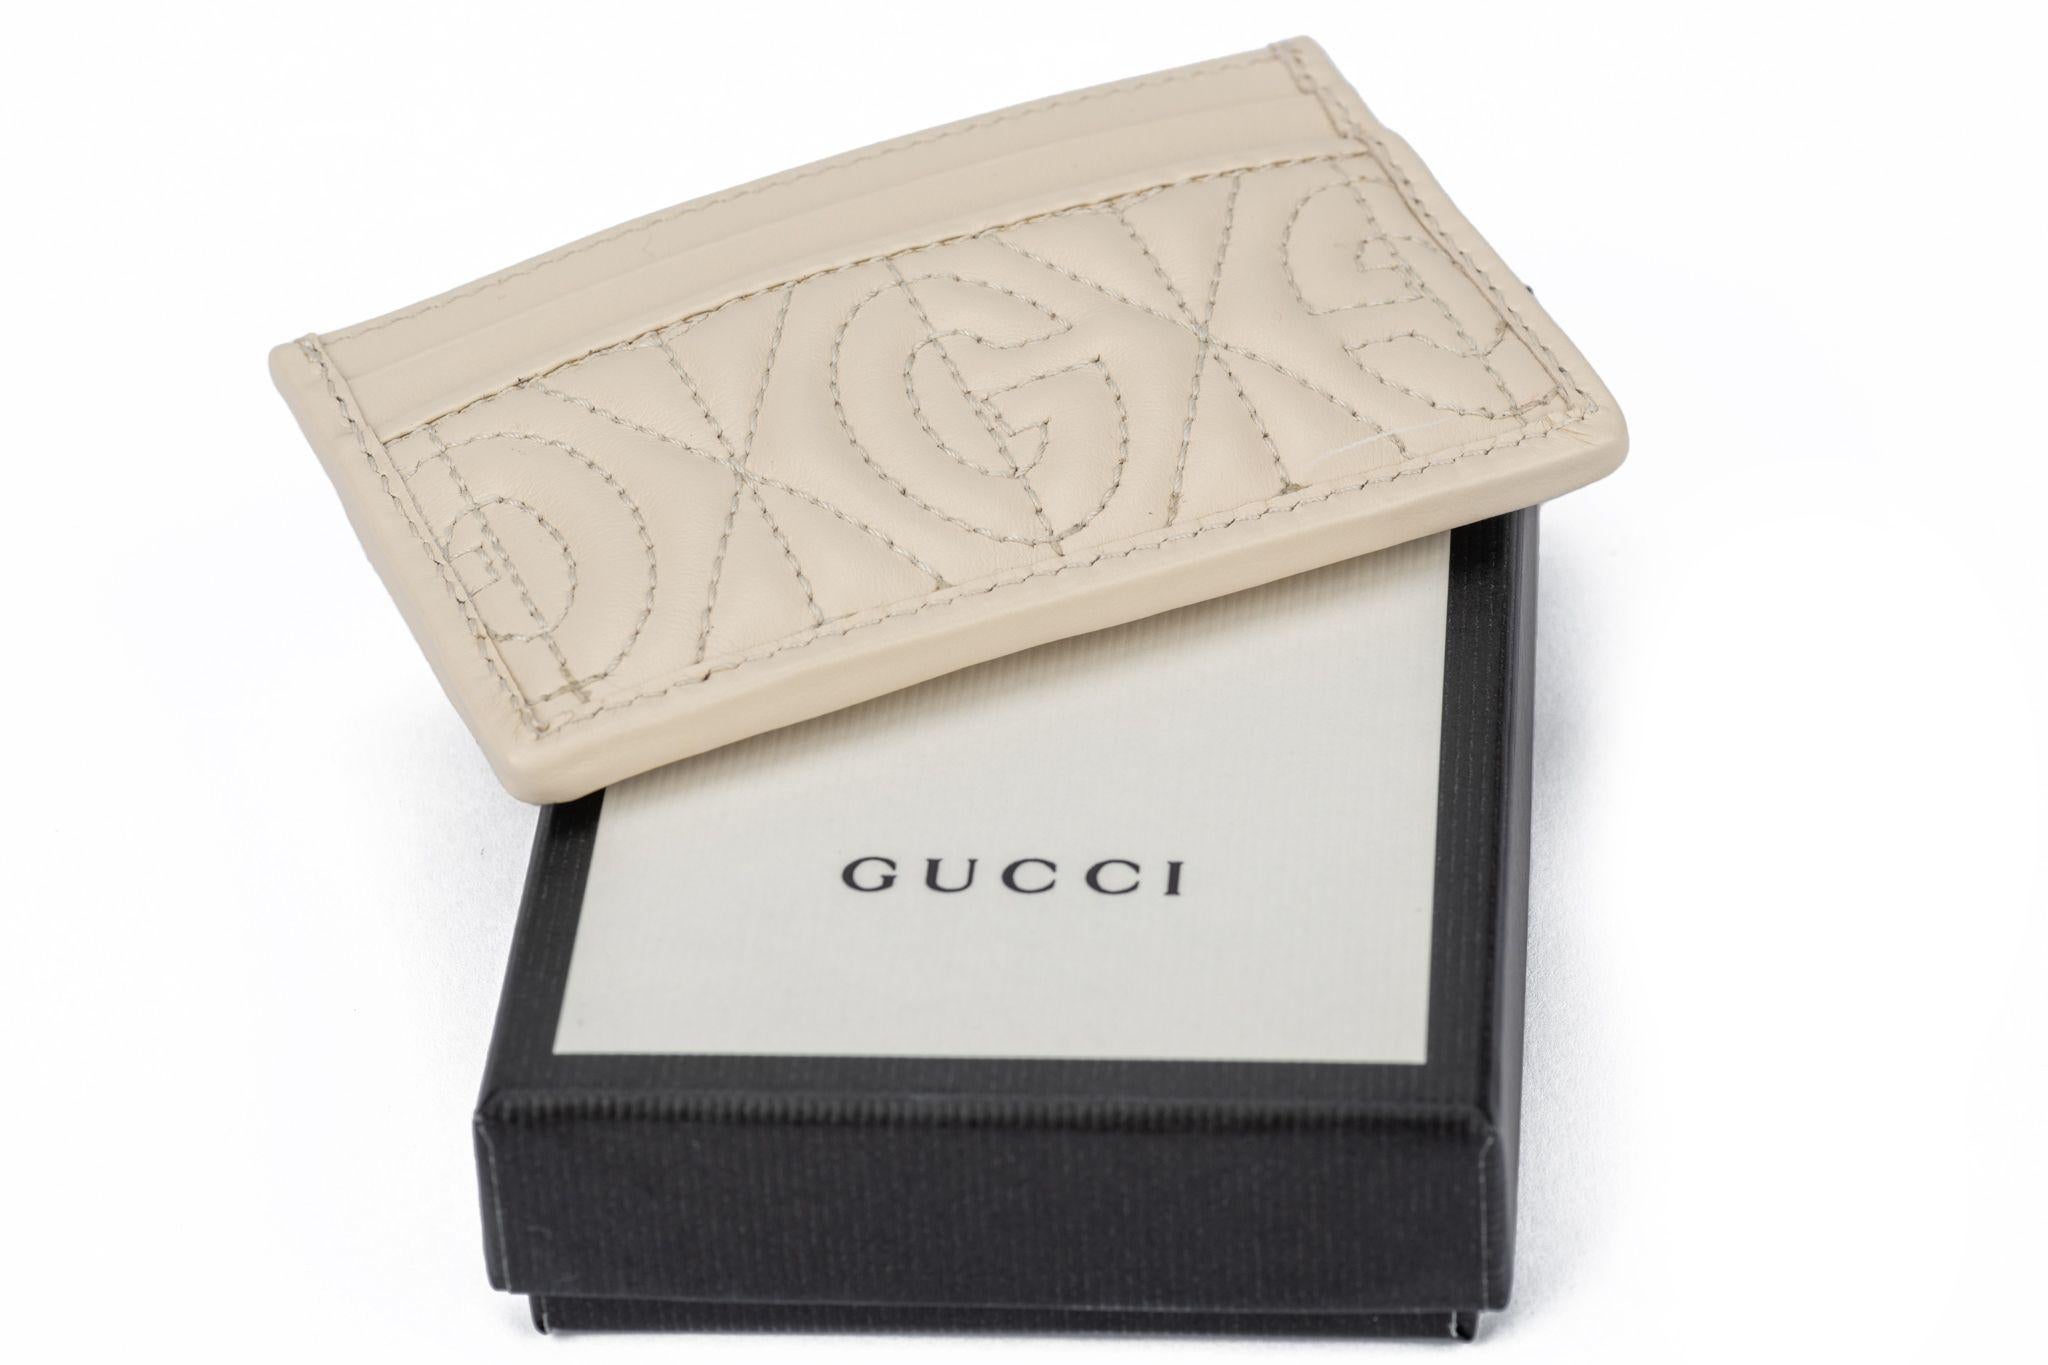 Gucci brand new cream embossed logo credit card case. 
Comes with booklets, original dustcover and box.